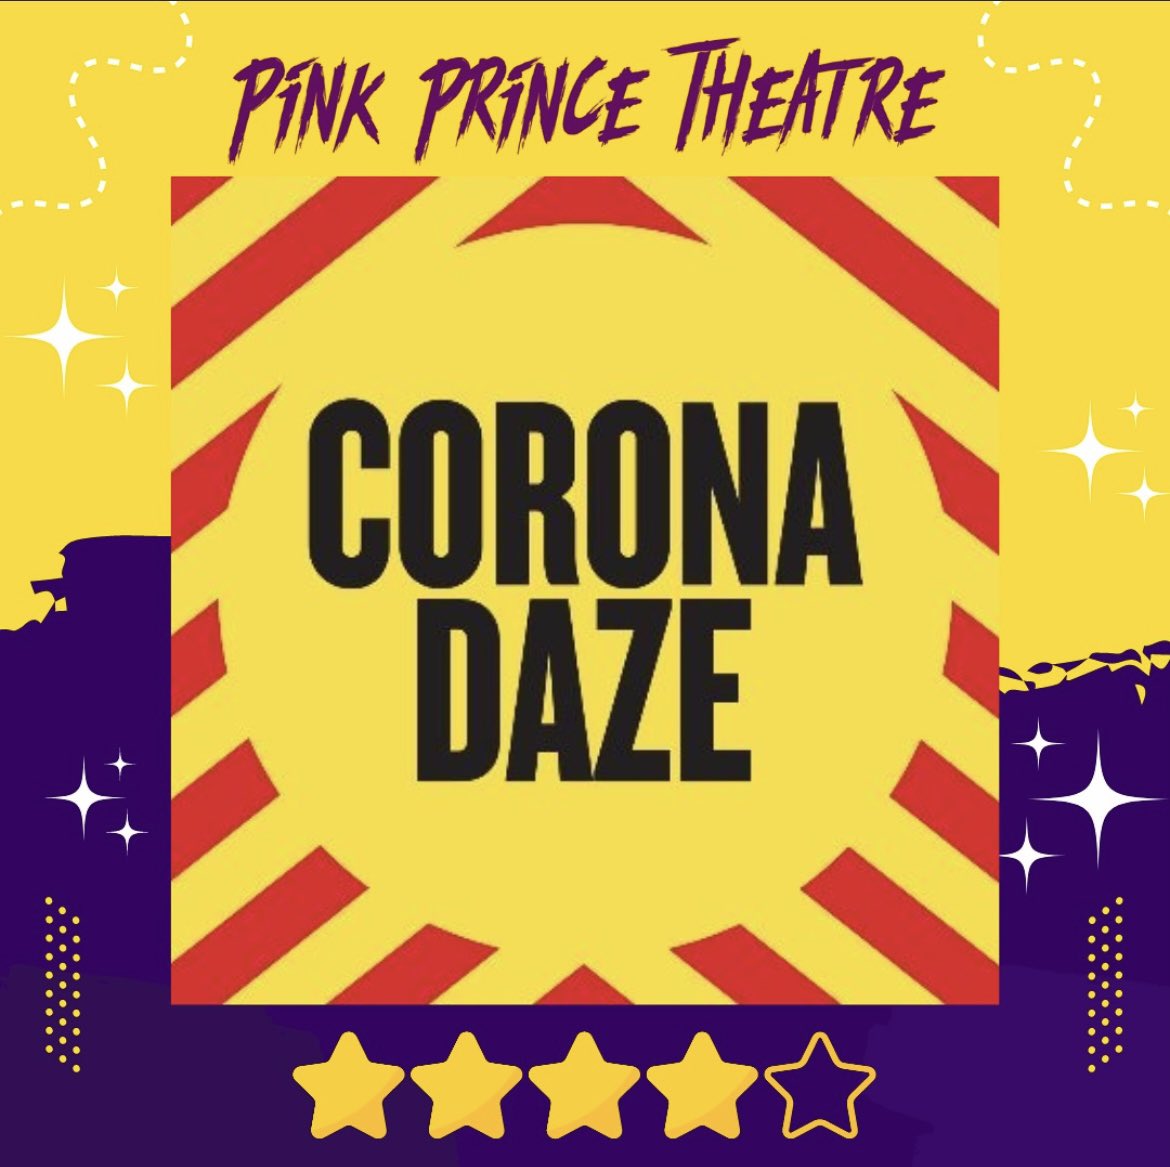 Check out this fantastic ⭐️⭐️⭐️⭐️ review of Corona Daze pinkprincetheatre.com/post/review-co… 
Book your tickets now to see this ‘nostalgic and relatable’ play from May 19th to 25th 🎟️ tinyurl.com/yuv6yexd #theatrereview #london #islington #play @TheHenChickens @pubtheatres1 @HamandHigh